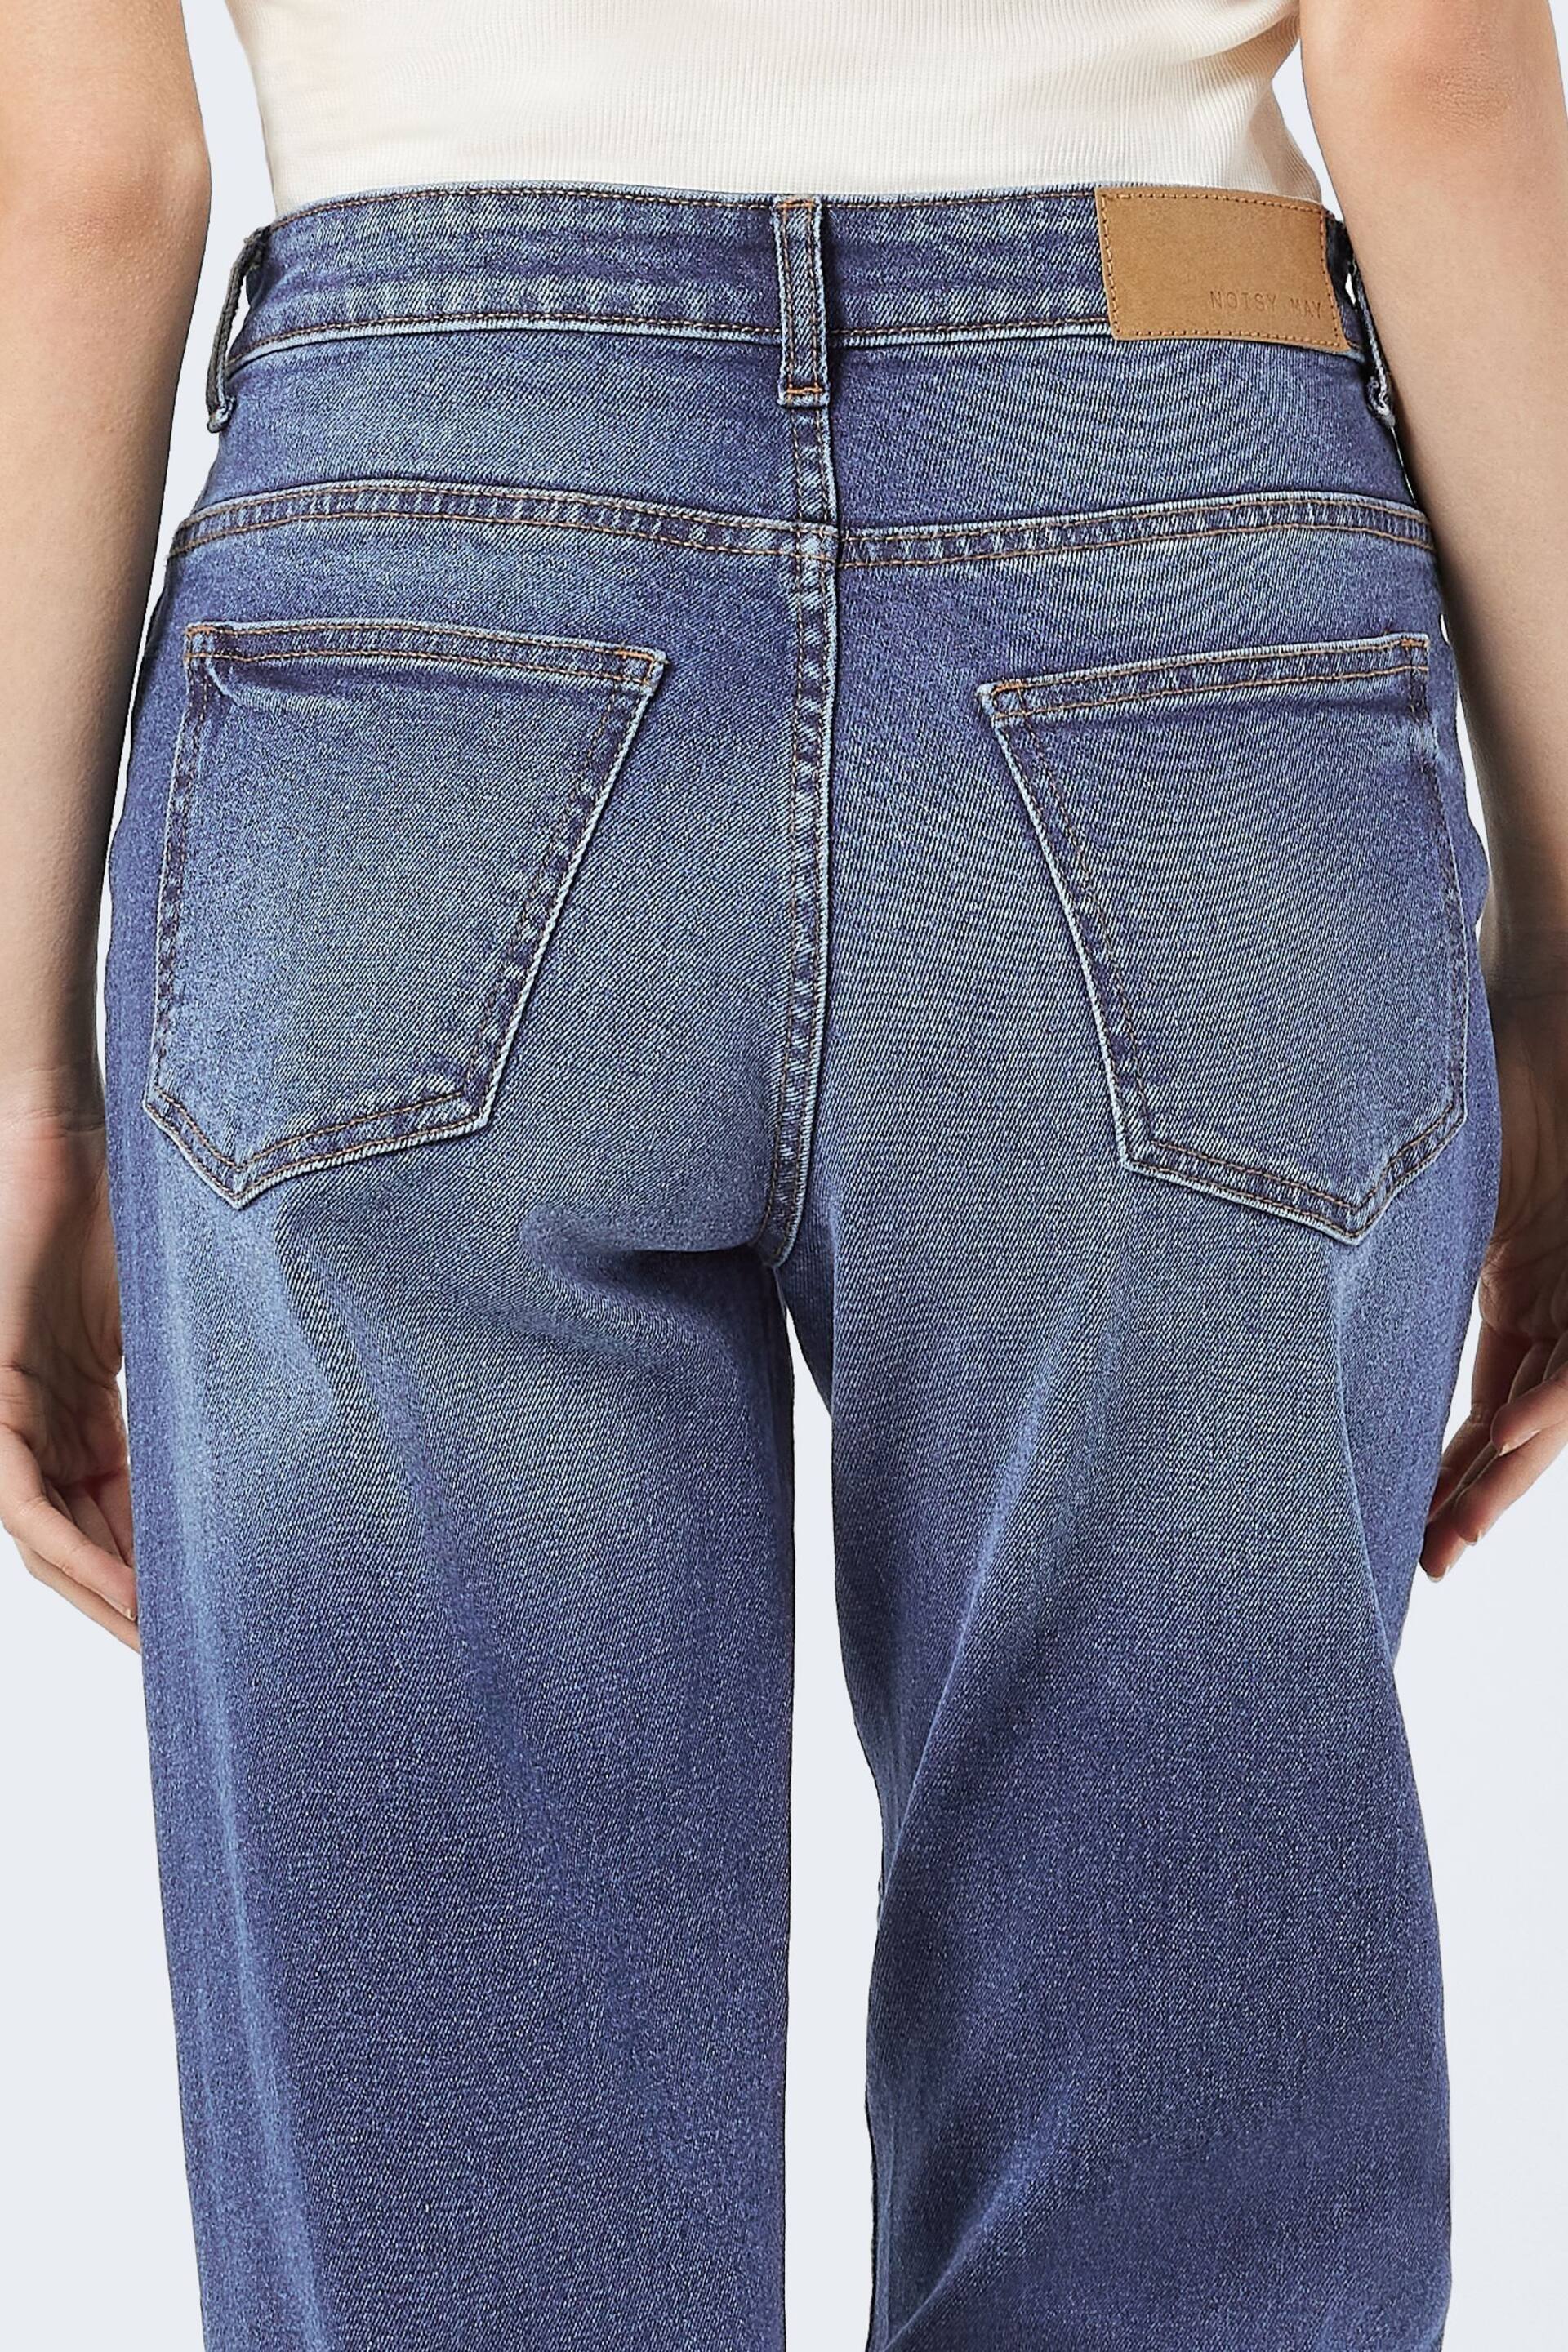 NOISY MAY Blue High Waisted Wide Leg Jeans - Image 5 of 8